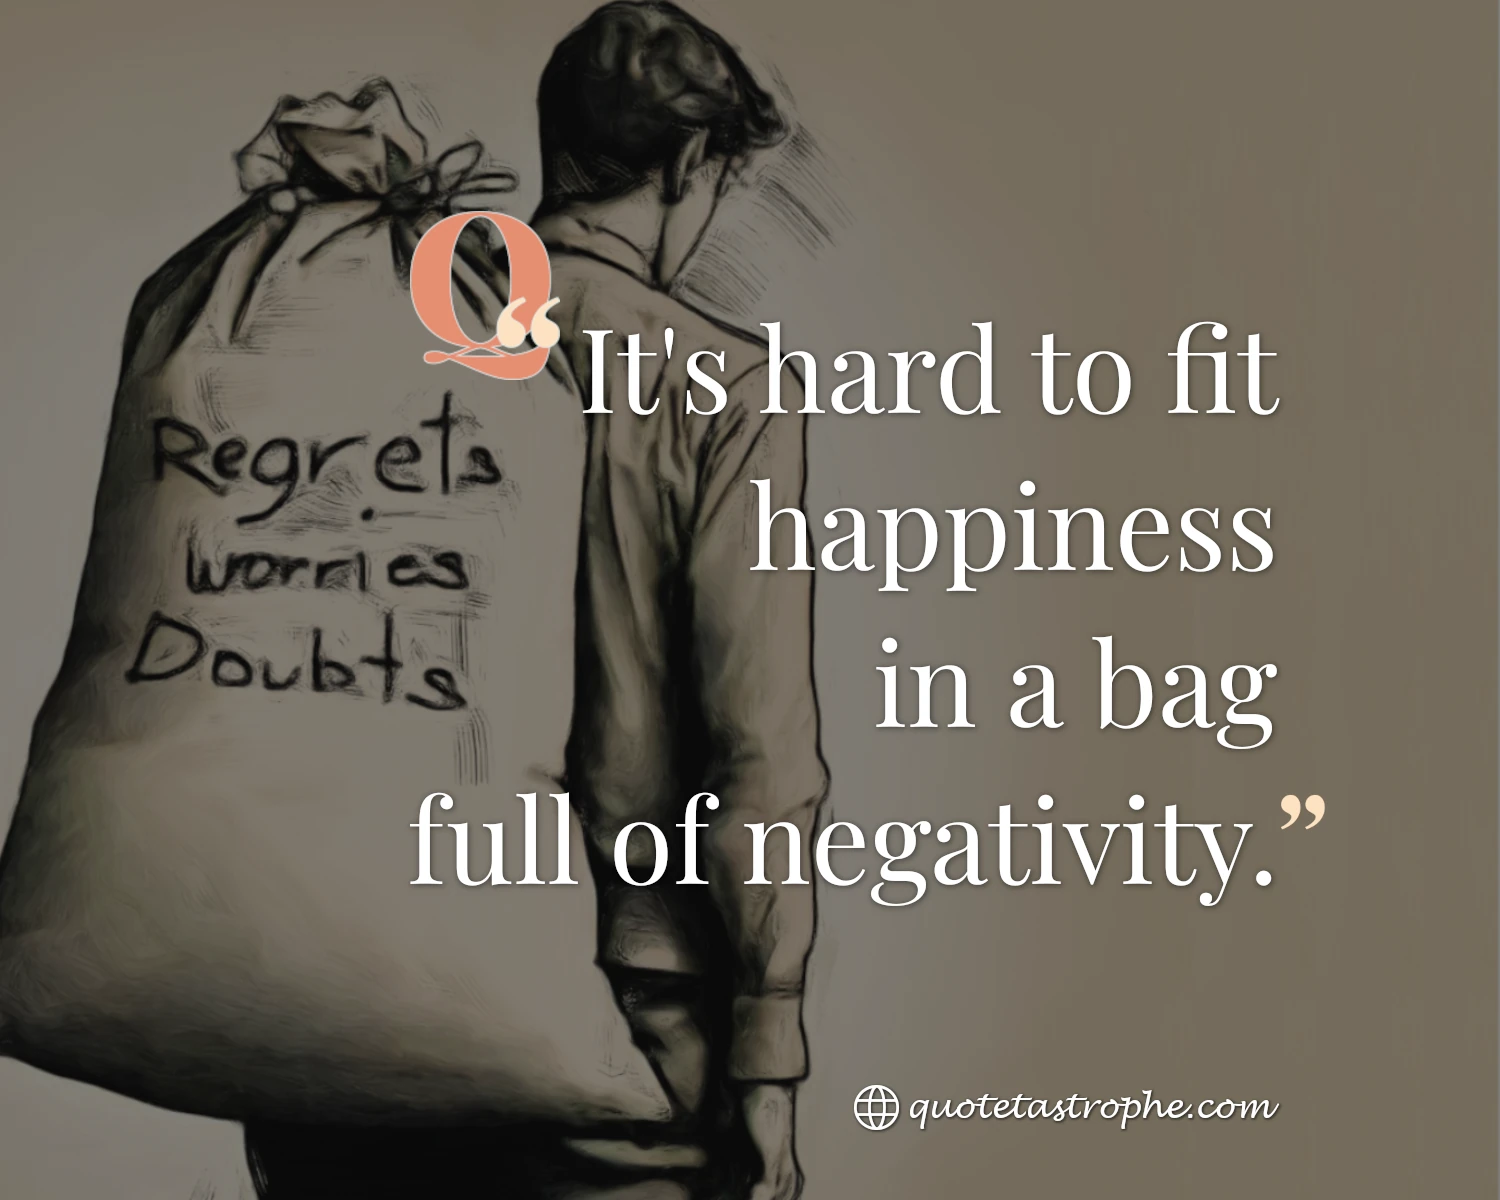 It's Hard to Fit Happiness in a Bag Full of Negativity